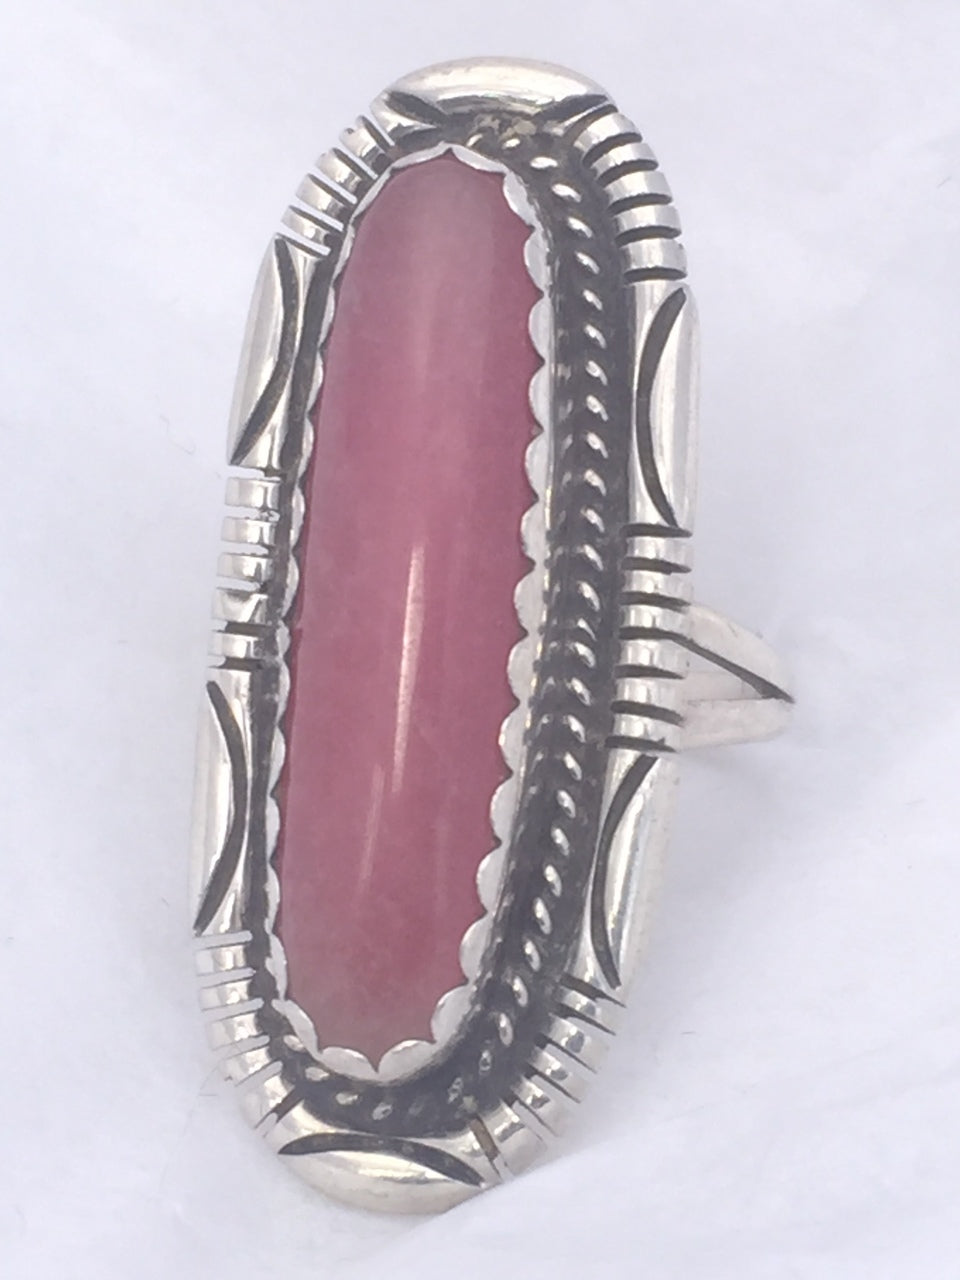 Vintage Sterling Silver Southwest Tribal Long Ring  Peachy Pink  Size 7  8.1g